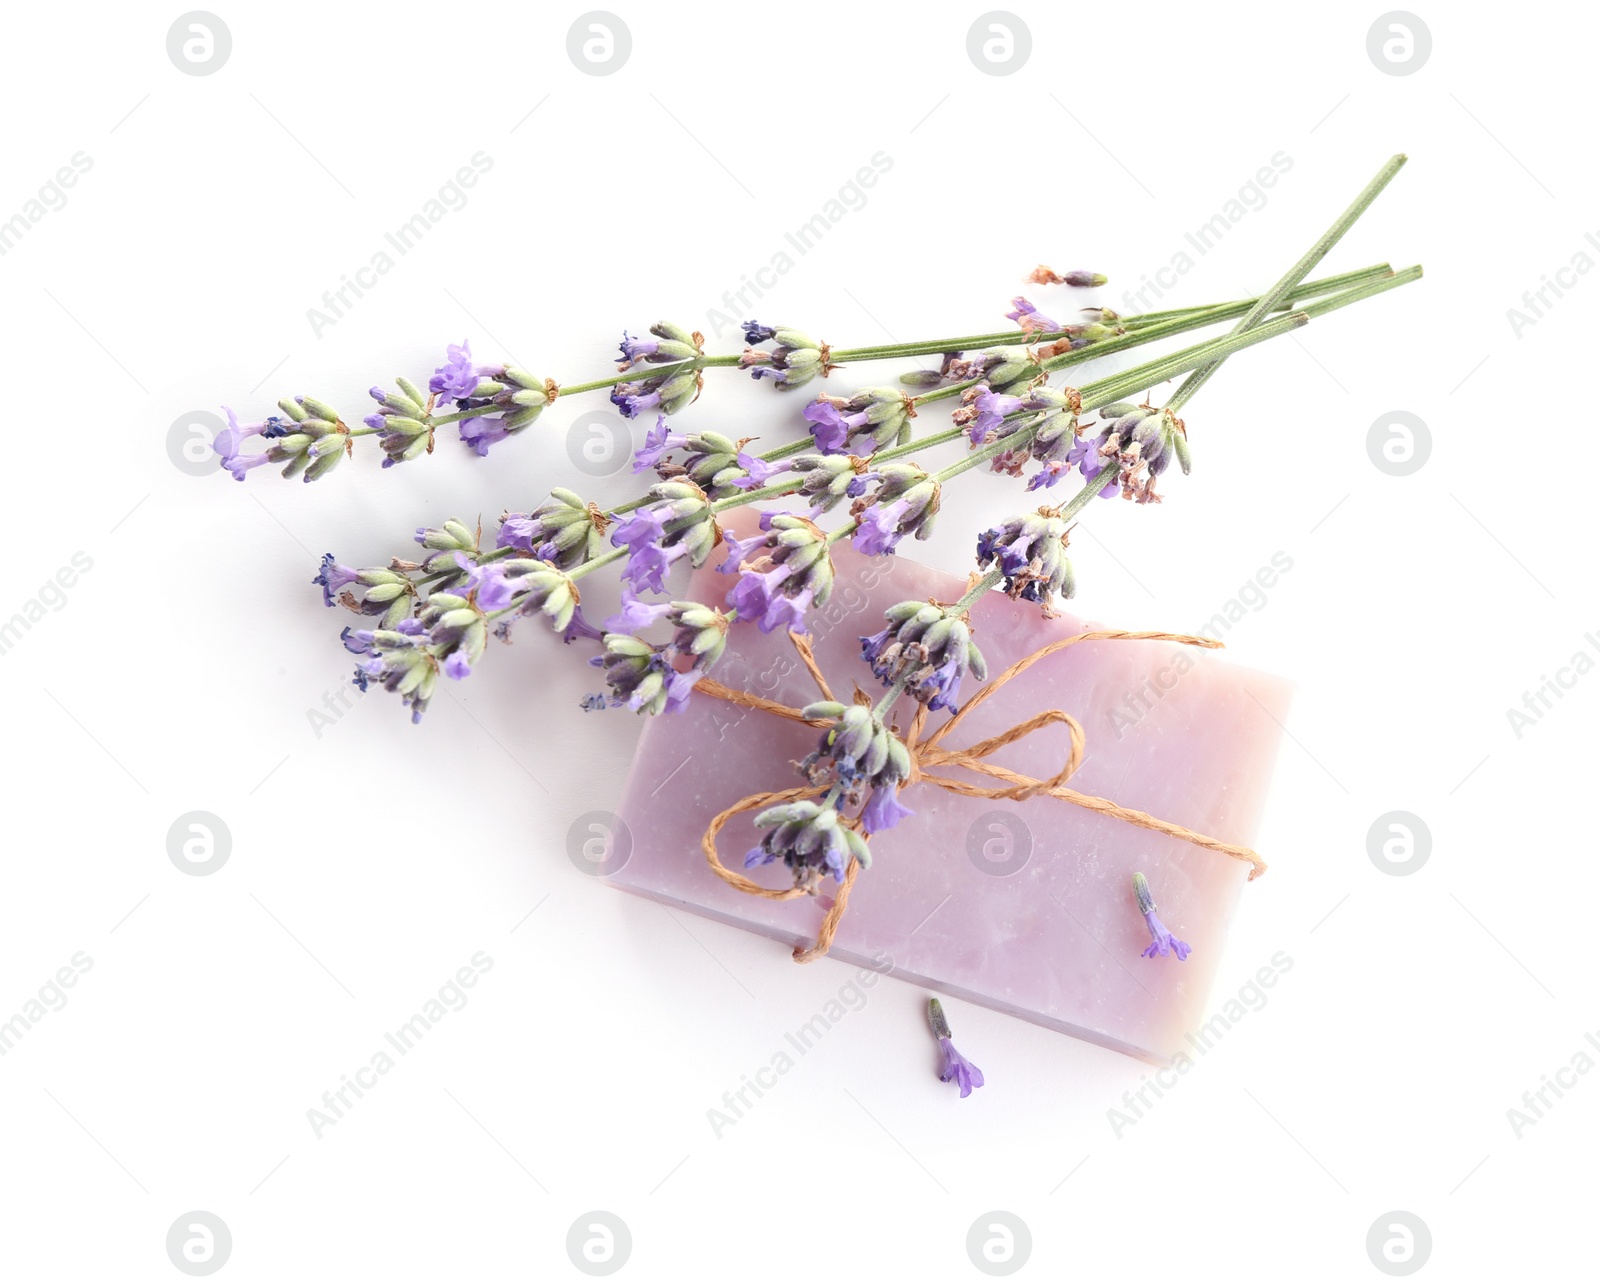 Photo of Hand made soap bar with lavender flowers on white background, top view